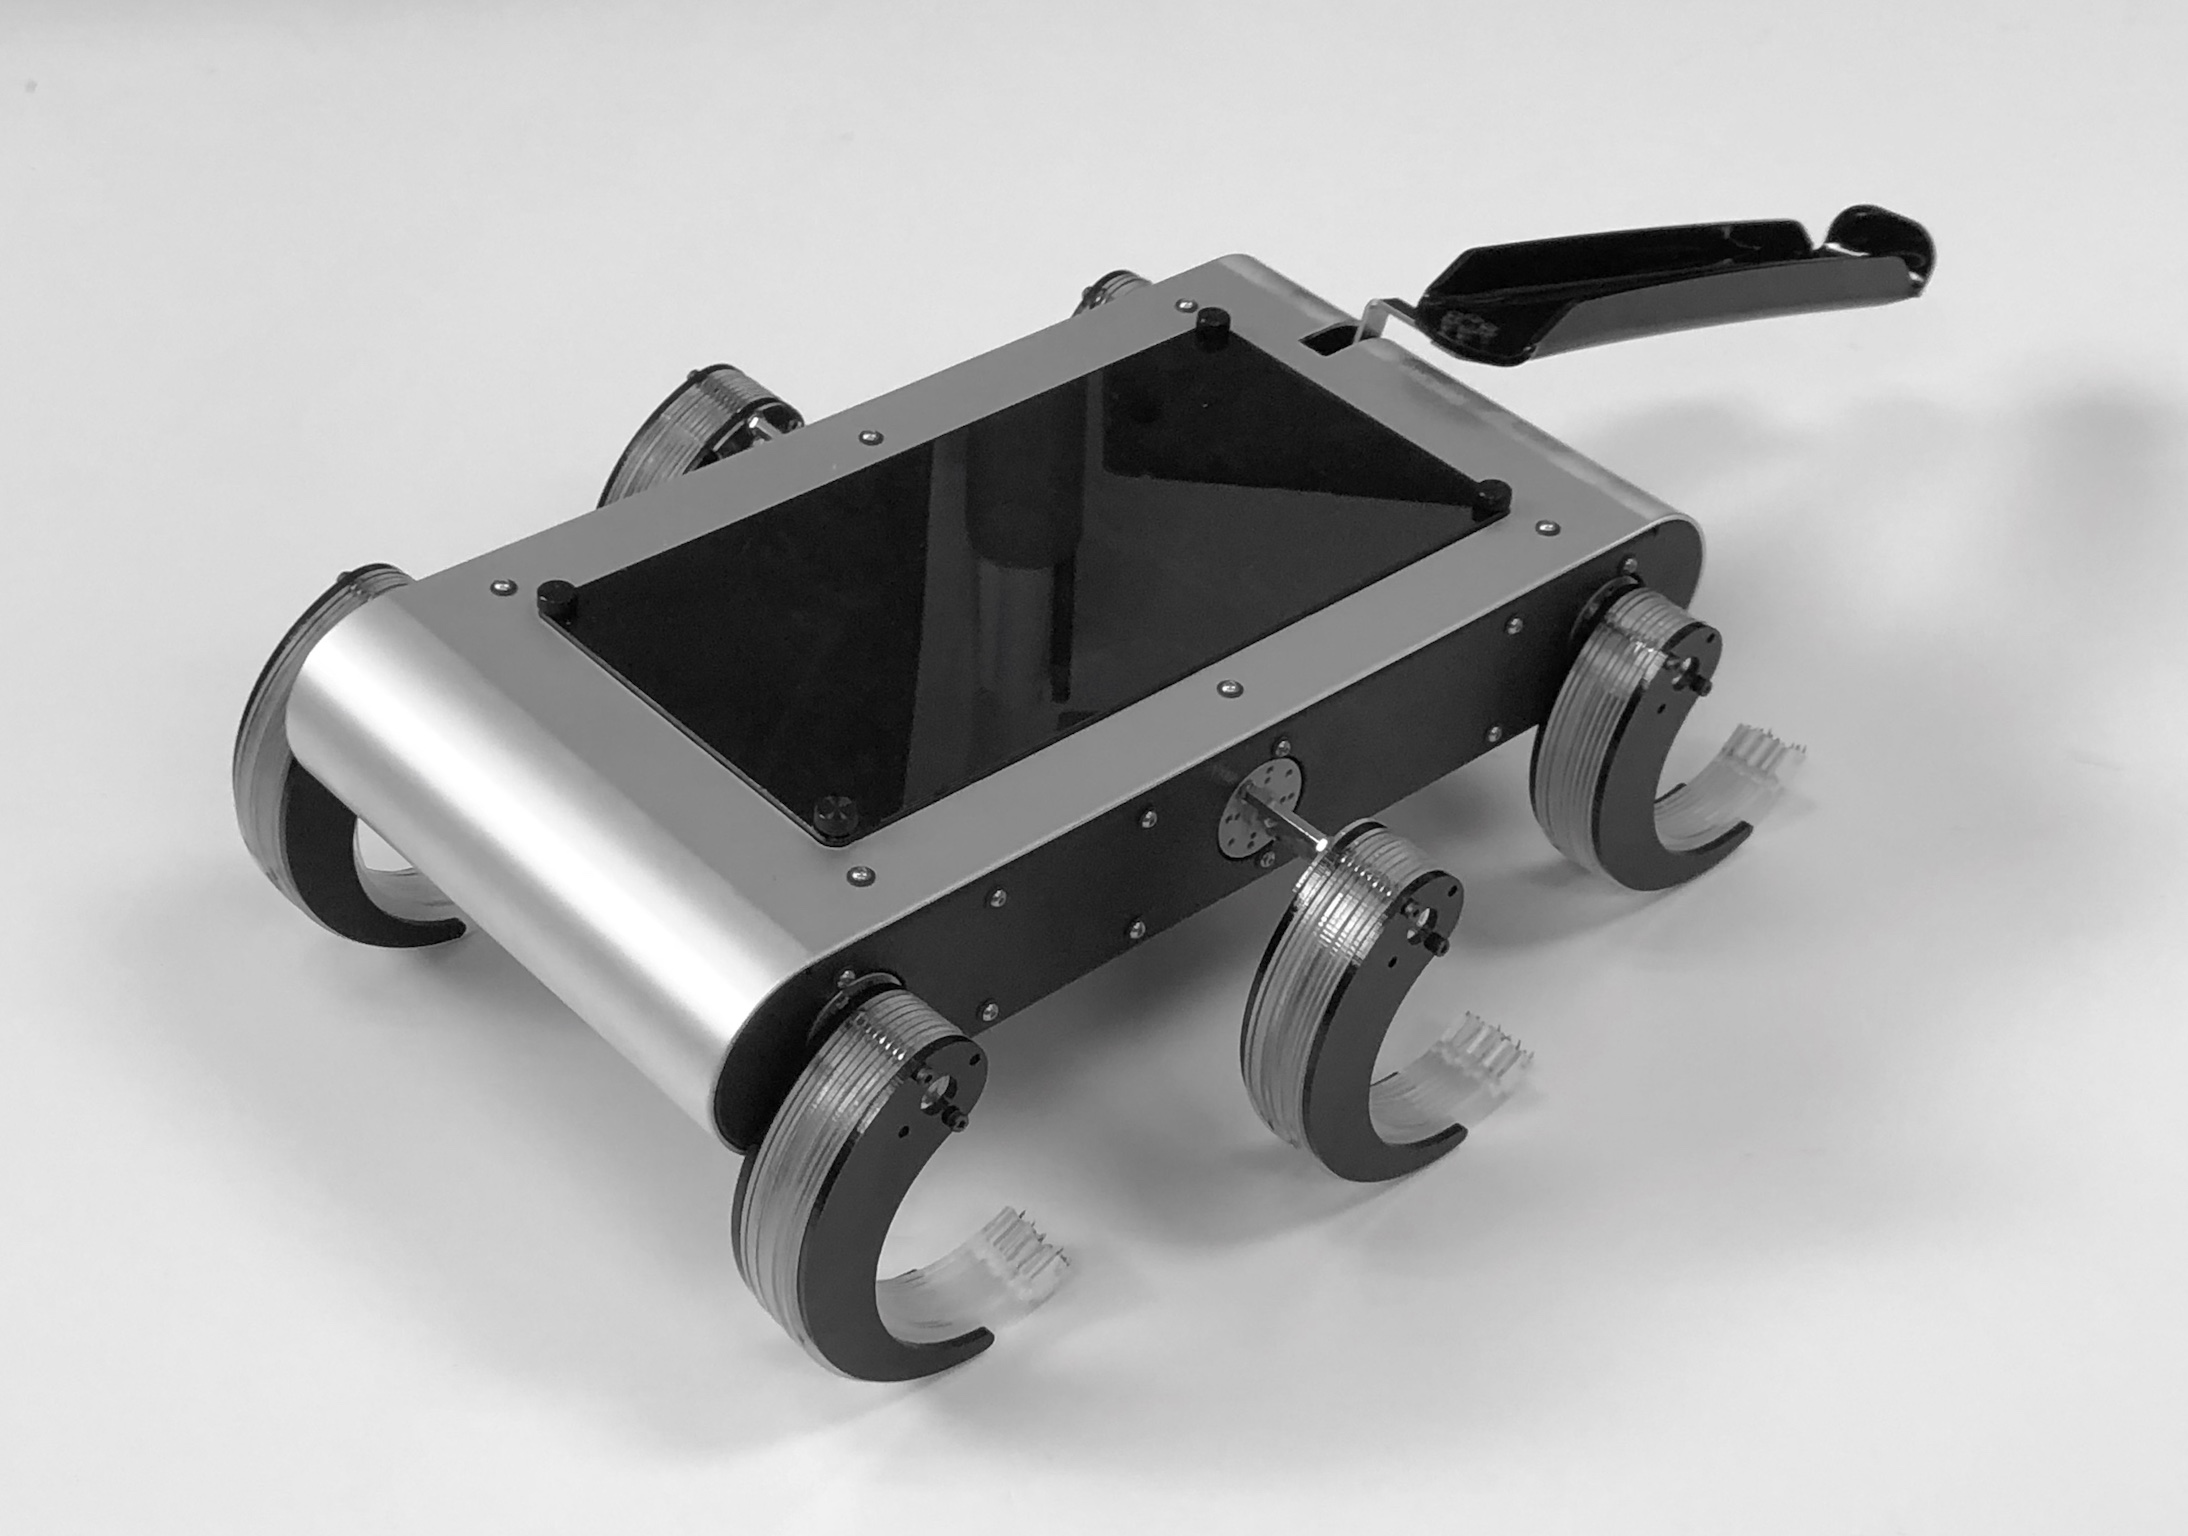 T-RHex is a hexapod robot with spiky feet and a tail